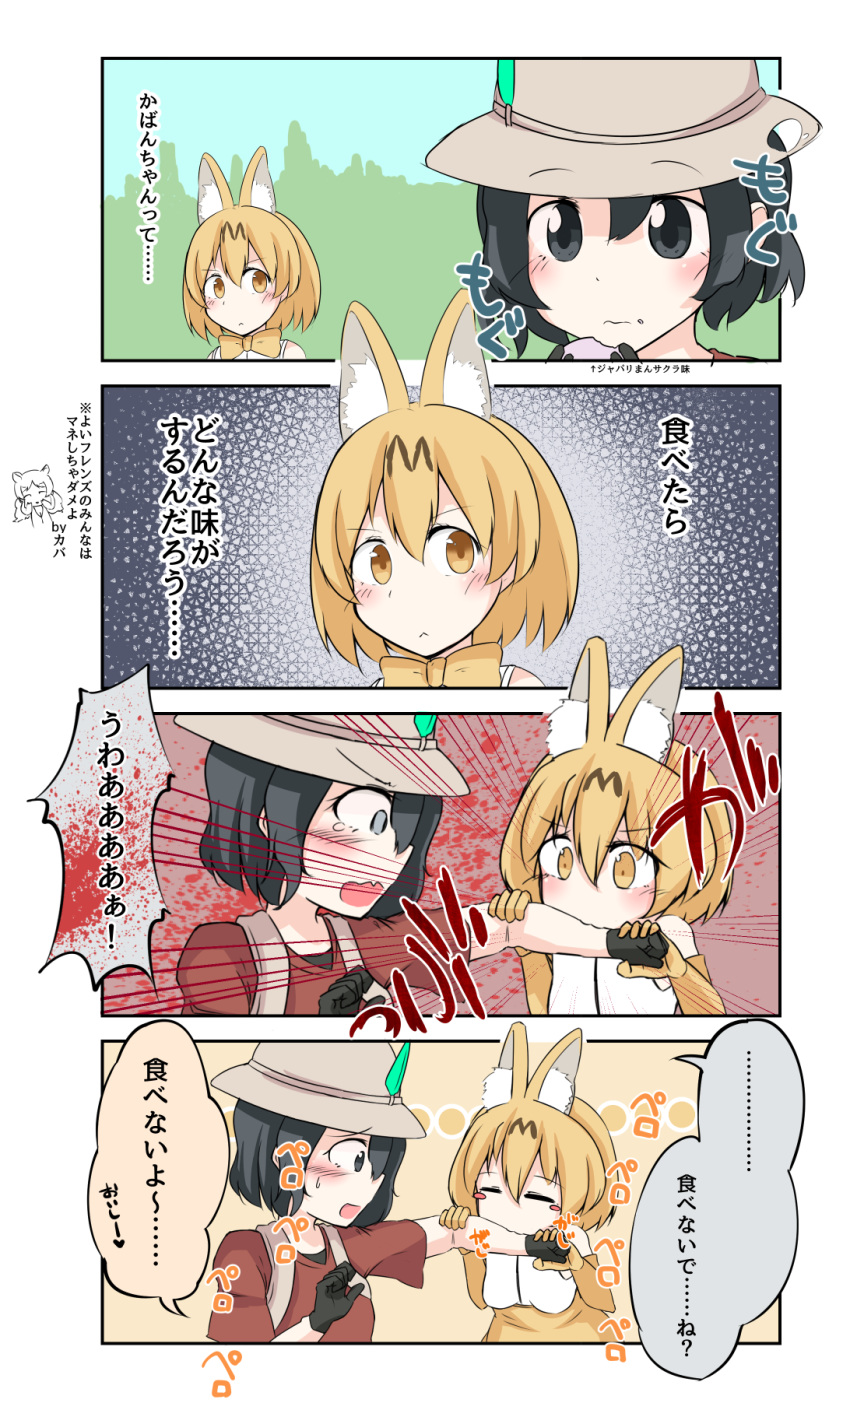 2girls 4koma animal_ears artist_request biting biting_arm black_eyes black_gloves black_hair blonde_hair bow bowtie bucket_hat comic commentary_request eating elbow_gloves emphasis_lines gloves hair_between_eyes hat hat_feather highres kaban_(kemono_friends) kemono_friends looking_at_another multiple_girls nibbling red_shoes serval_(kemono_friends) serval_ears shirt shoes short_hair surprised white_shirt yellow_bow yellow_eyes yellow_gloves